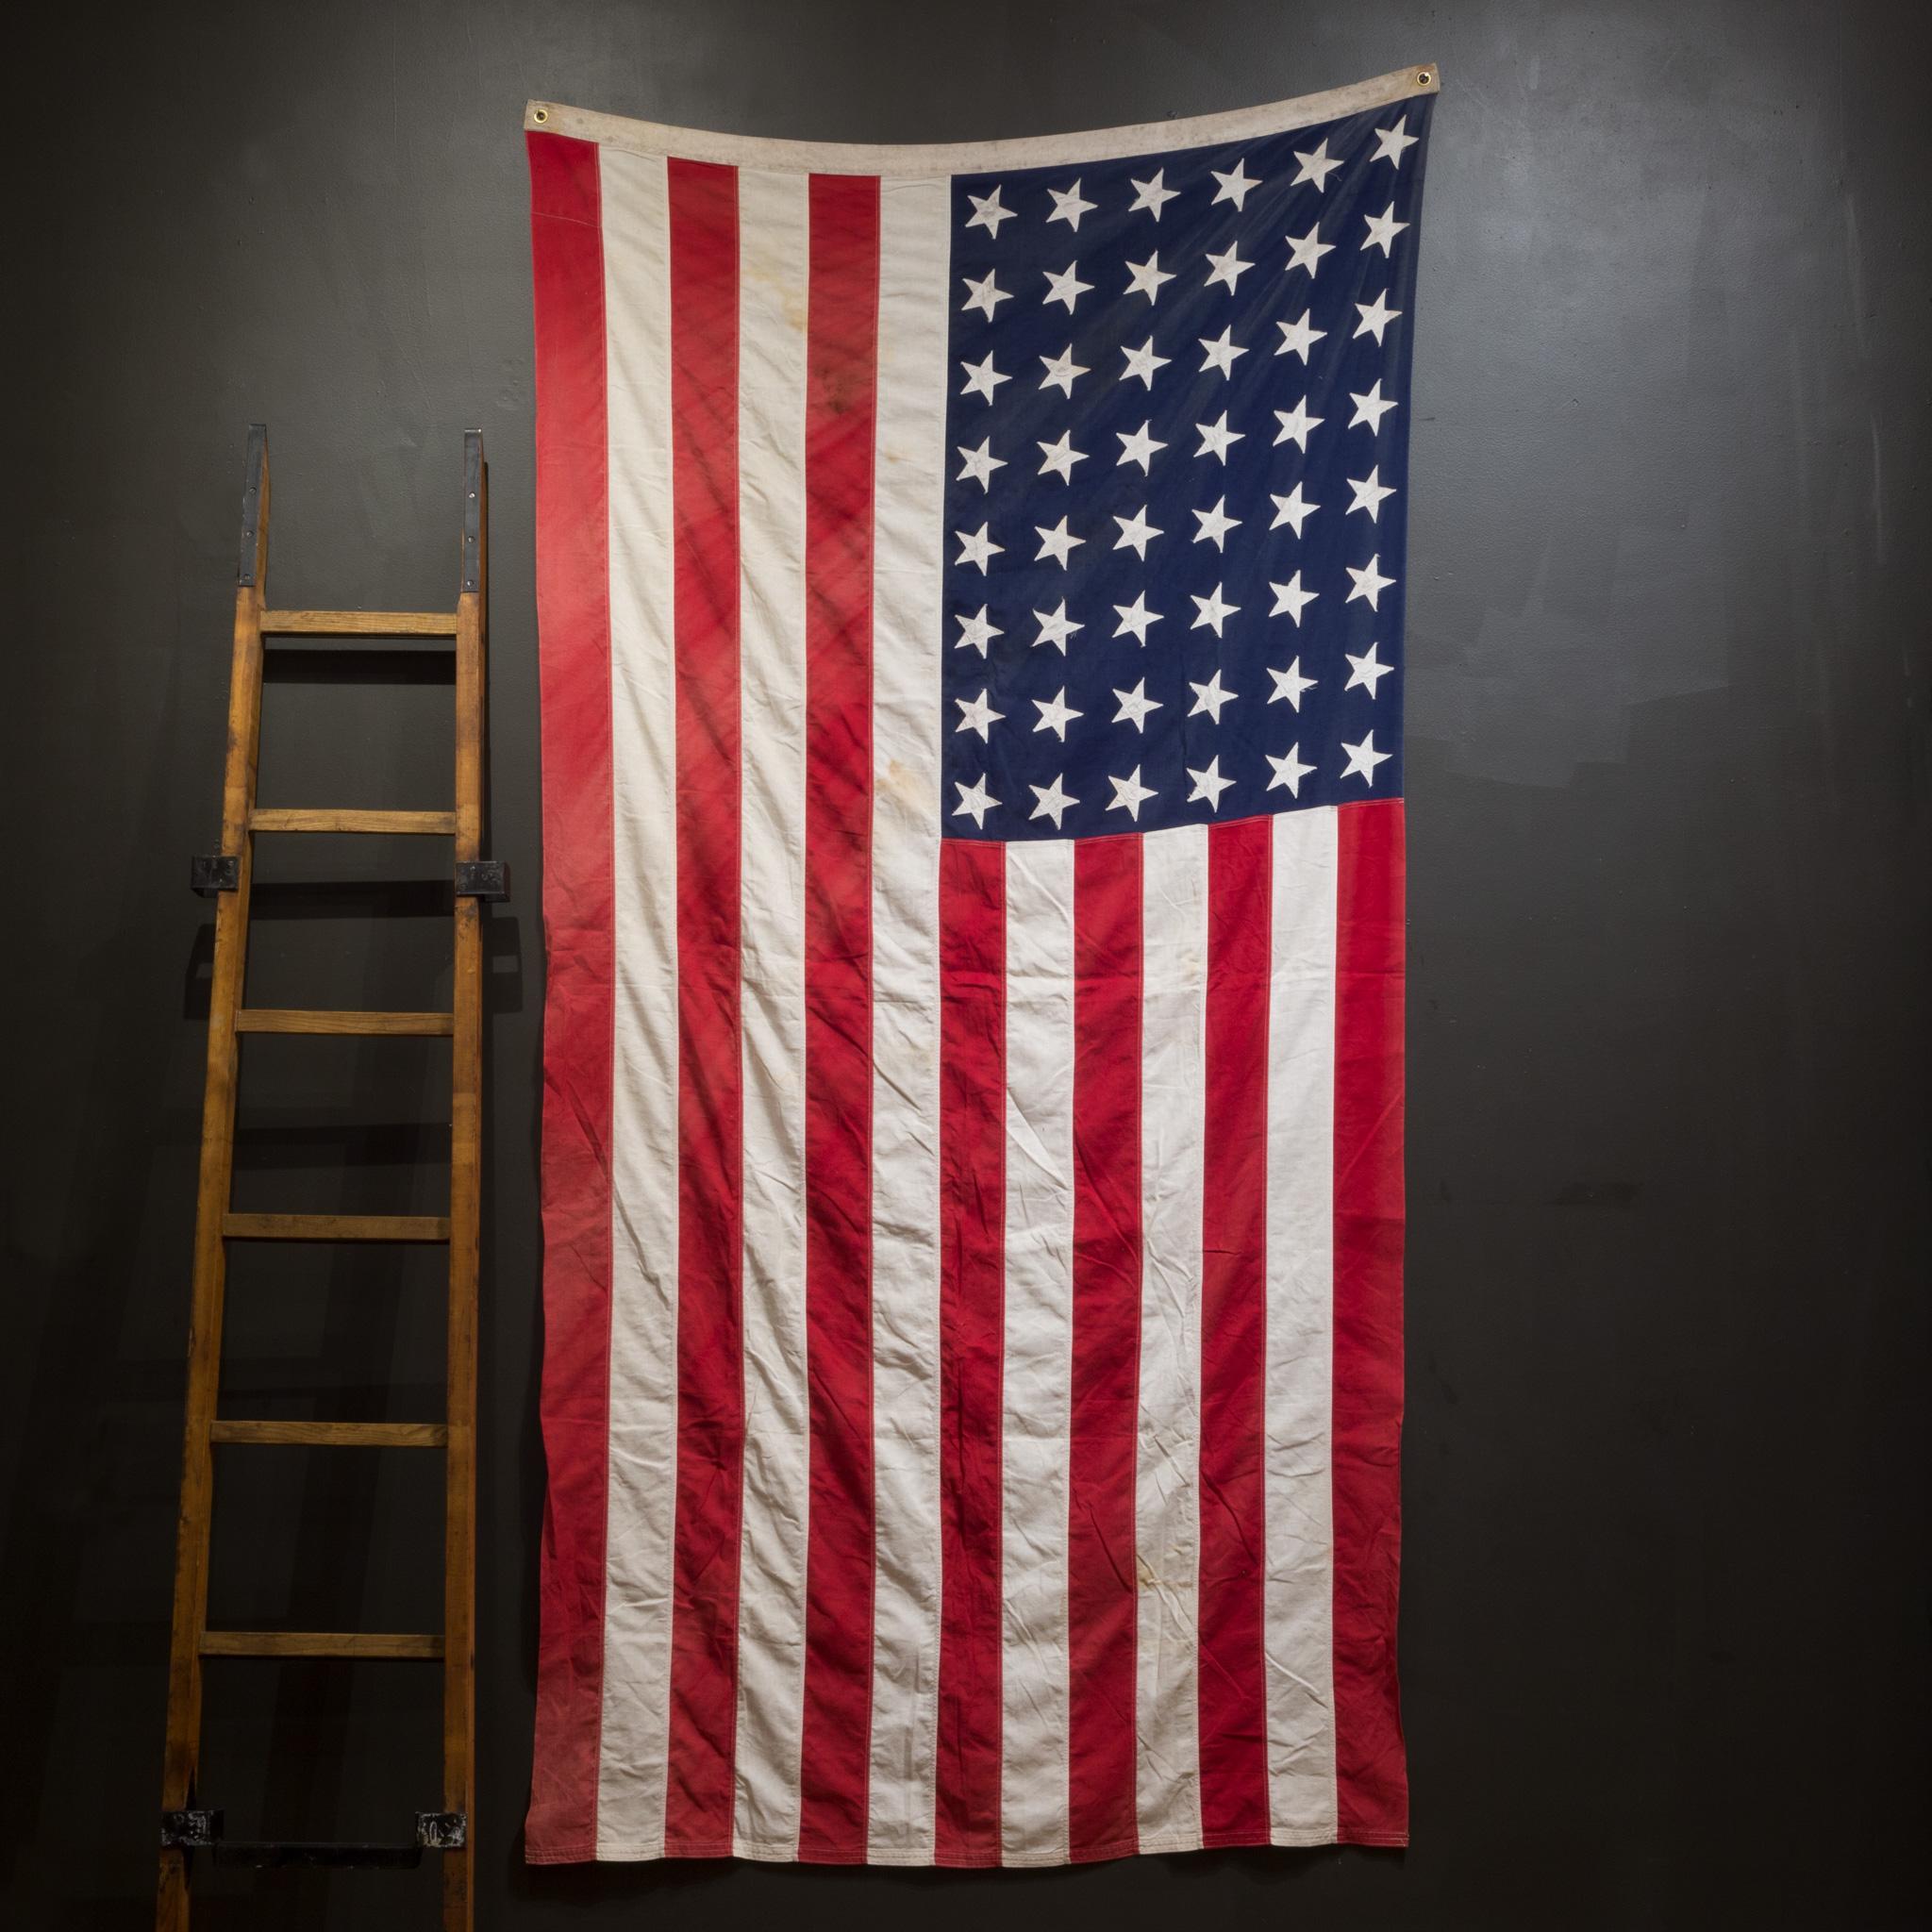 About

This is an original monumental American flag made with 48 hand sewn stars and stripes. It is in good condition and has brass grommets to hang.

Creator unknown.
Date of manufacture c.1940-1950.
Materials and techniques cotton,